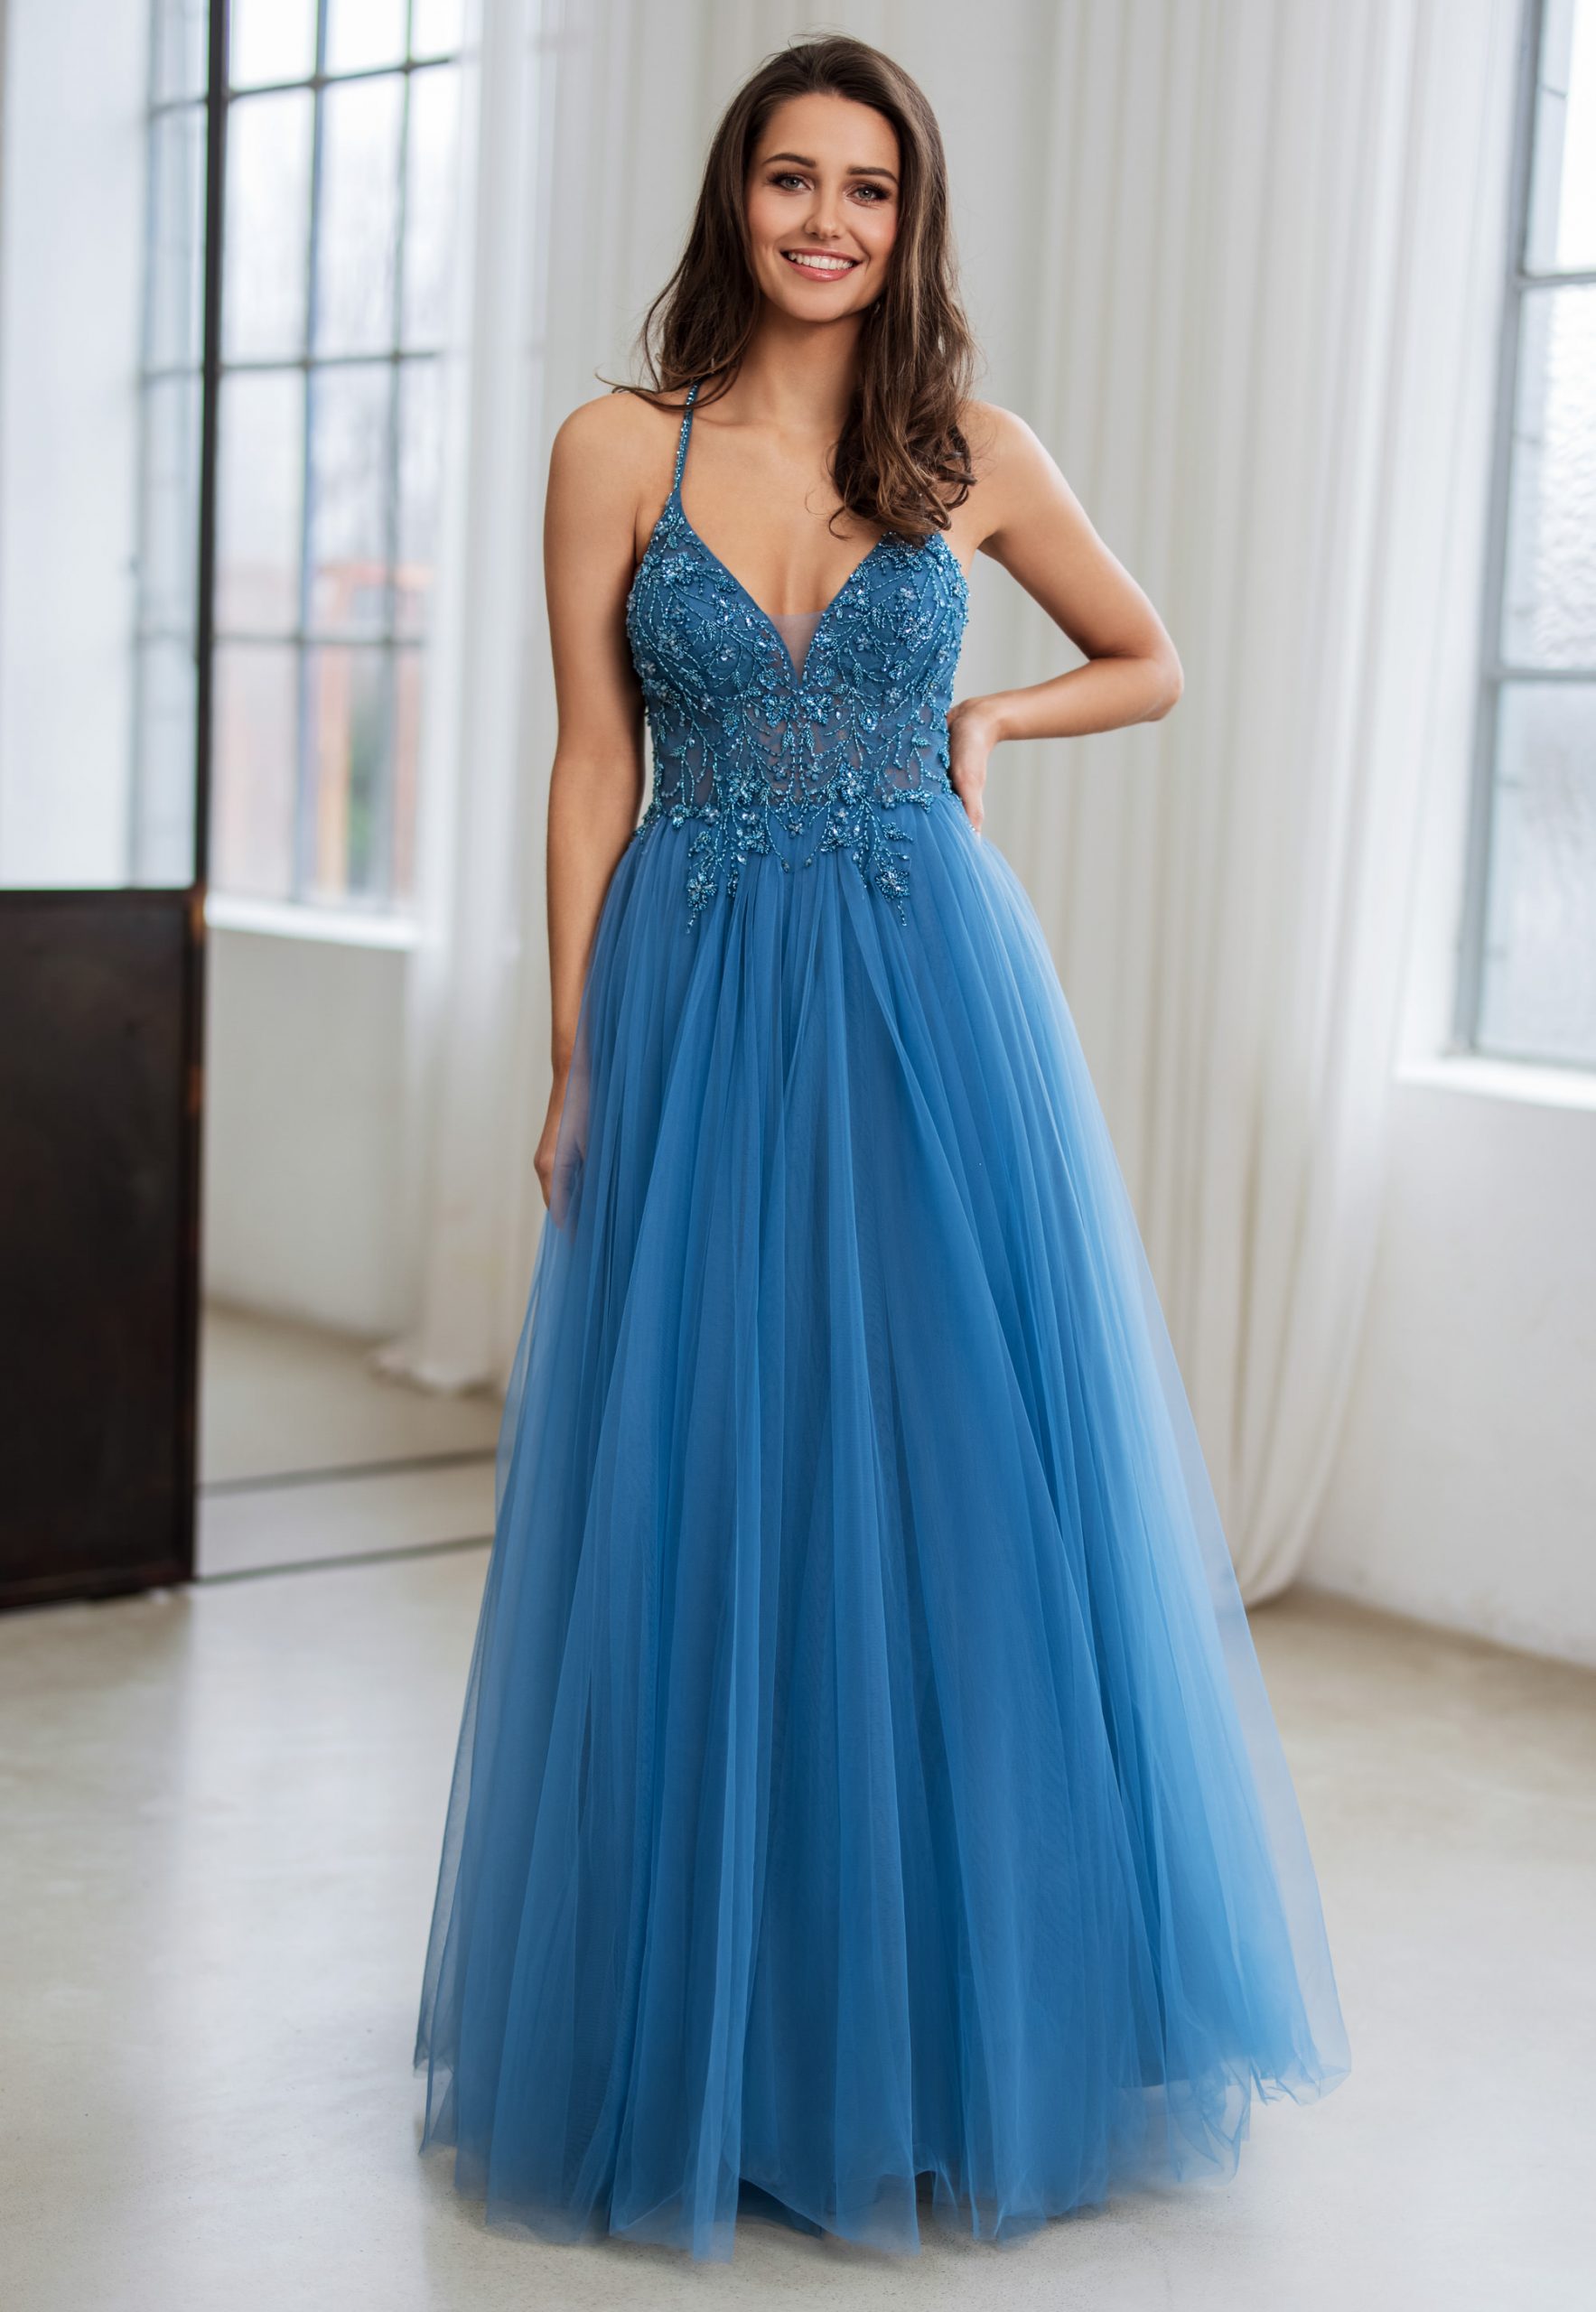 Christian Koehlert 0823 Embellished Fitted Satin Prom Dress - The Prom  Gallery